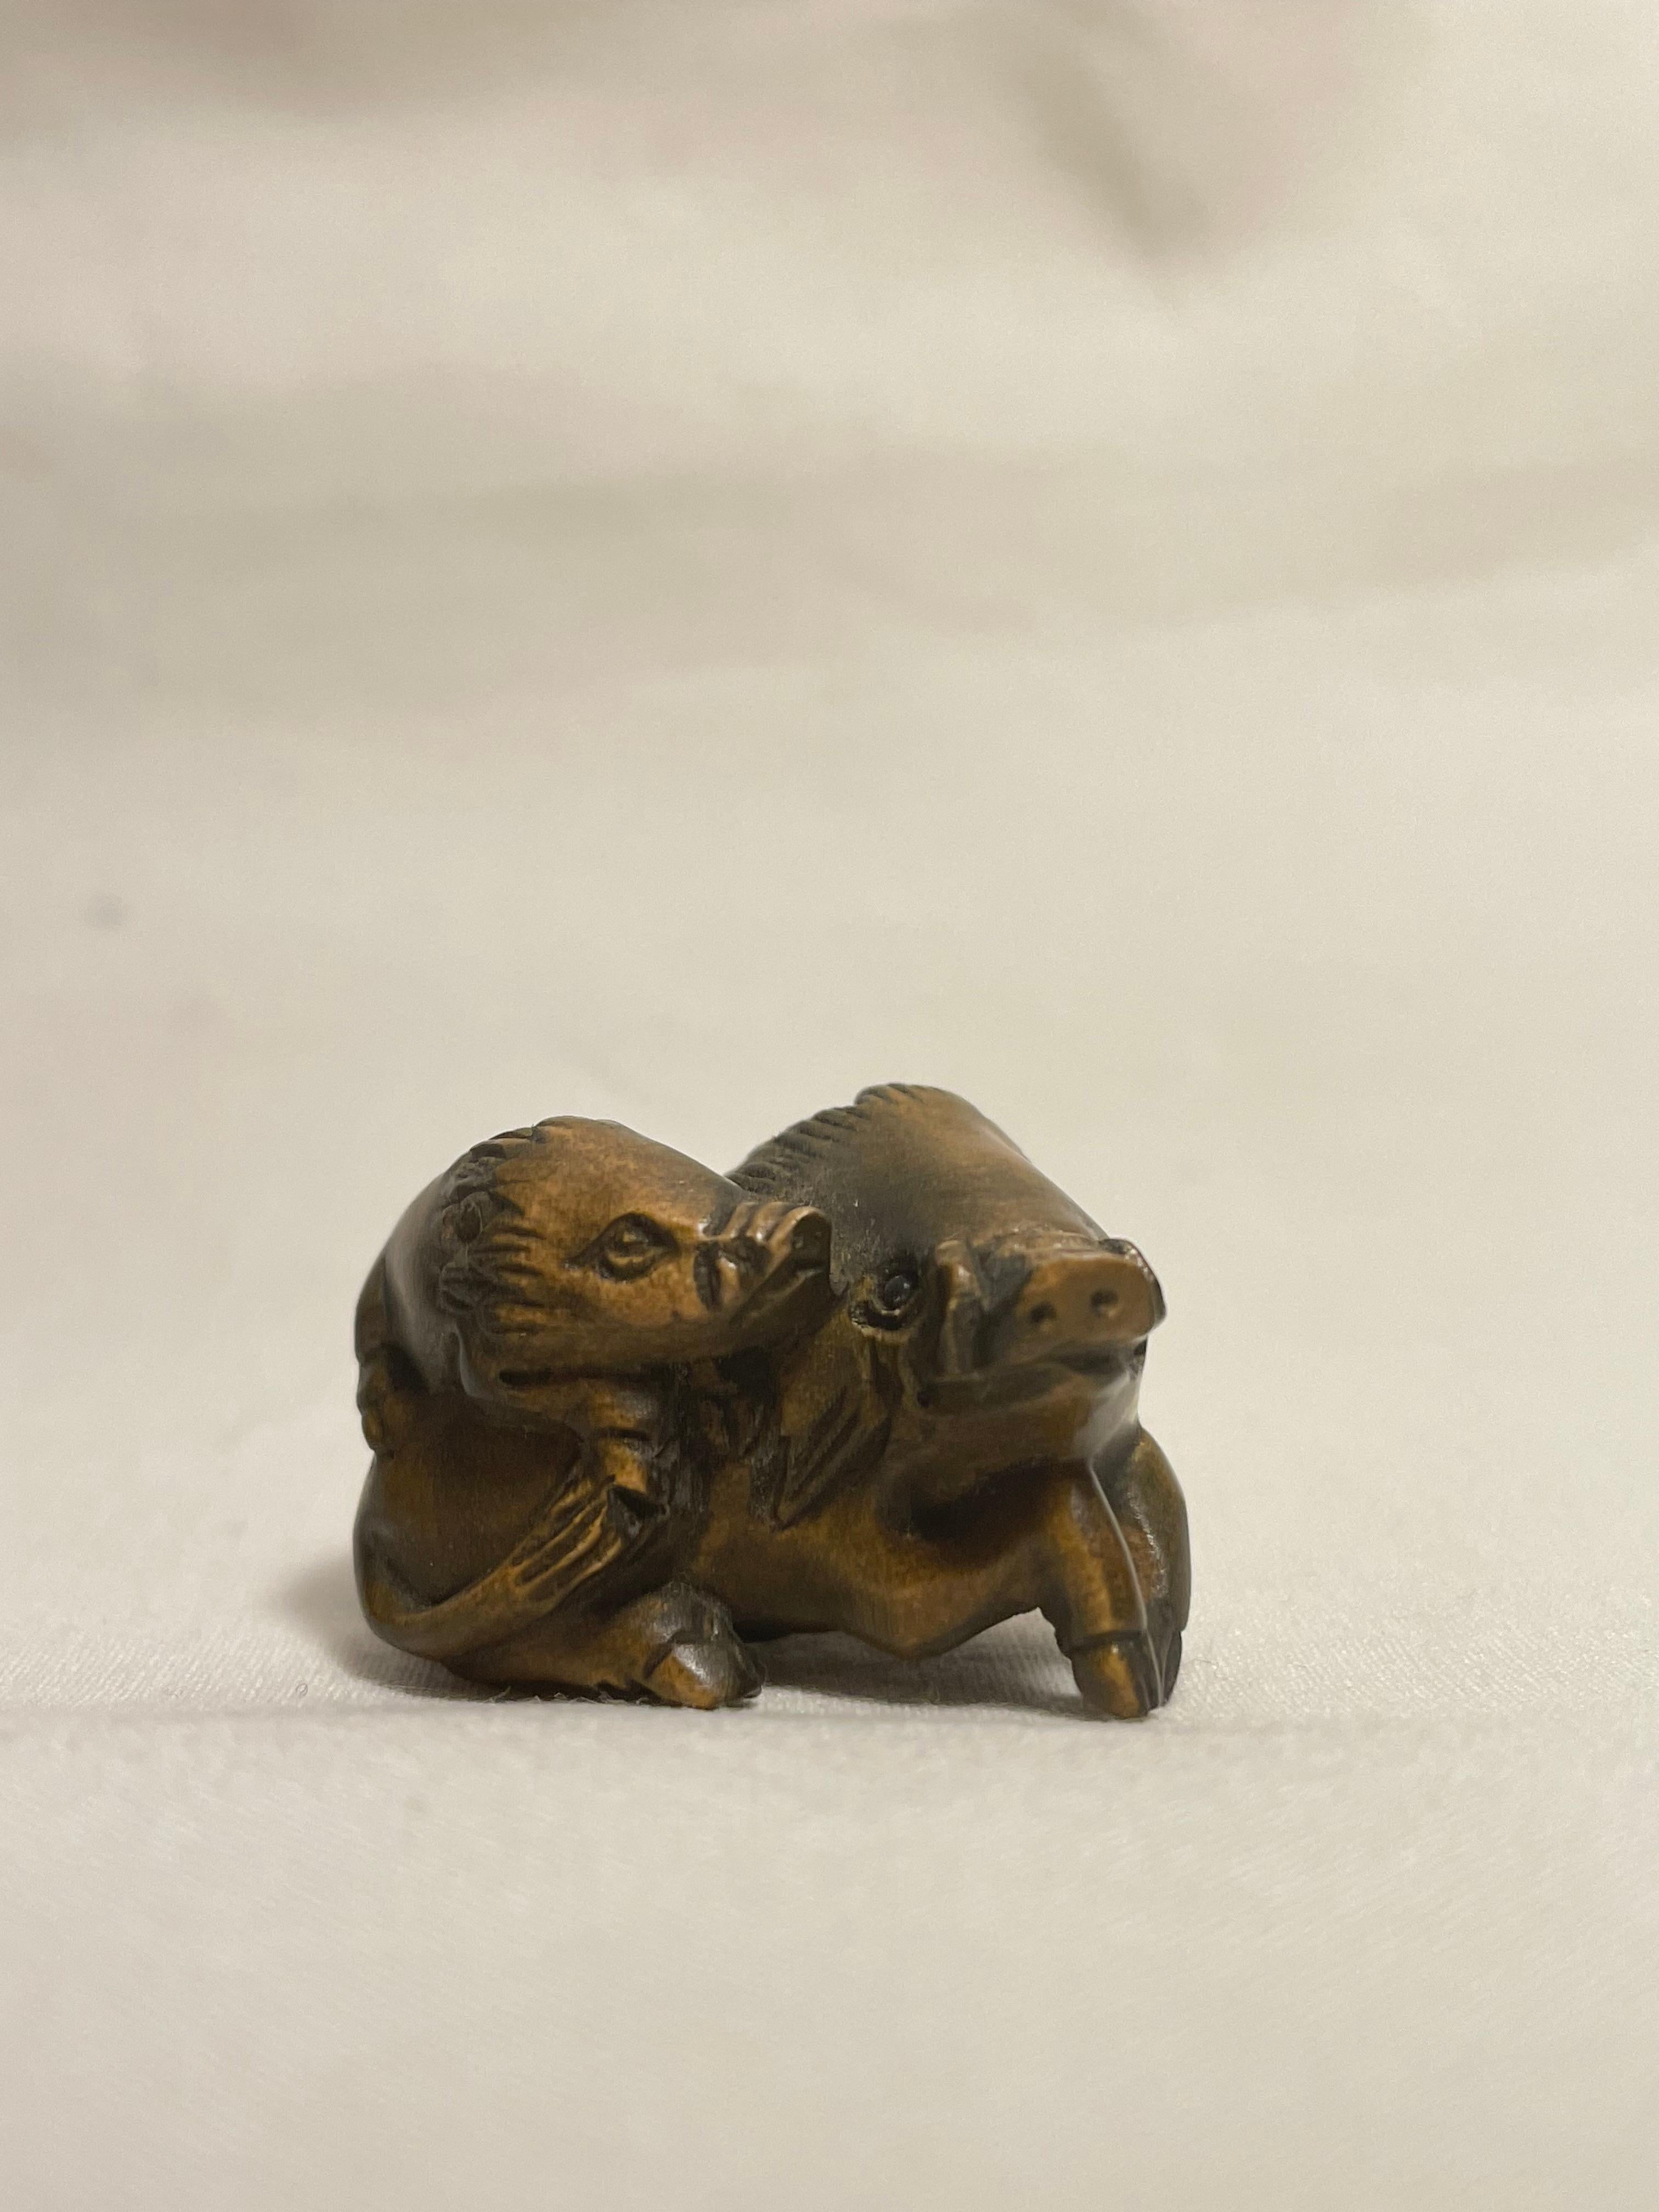 This is an antique netsuke made in Japan around Showa period 1960s.

Dimensions: 2.5 x 2.3 x H2 cm
Sculpture: Wild Boar
Era: 1960s (Showa) 

Netsuke is a miniature sculpture, originating in 17th century Japan.
Initially a simply-carved button